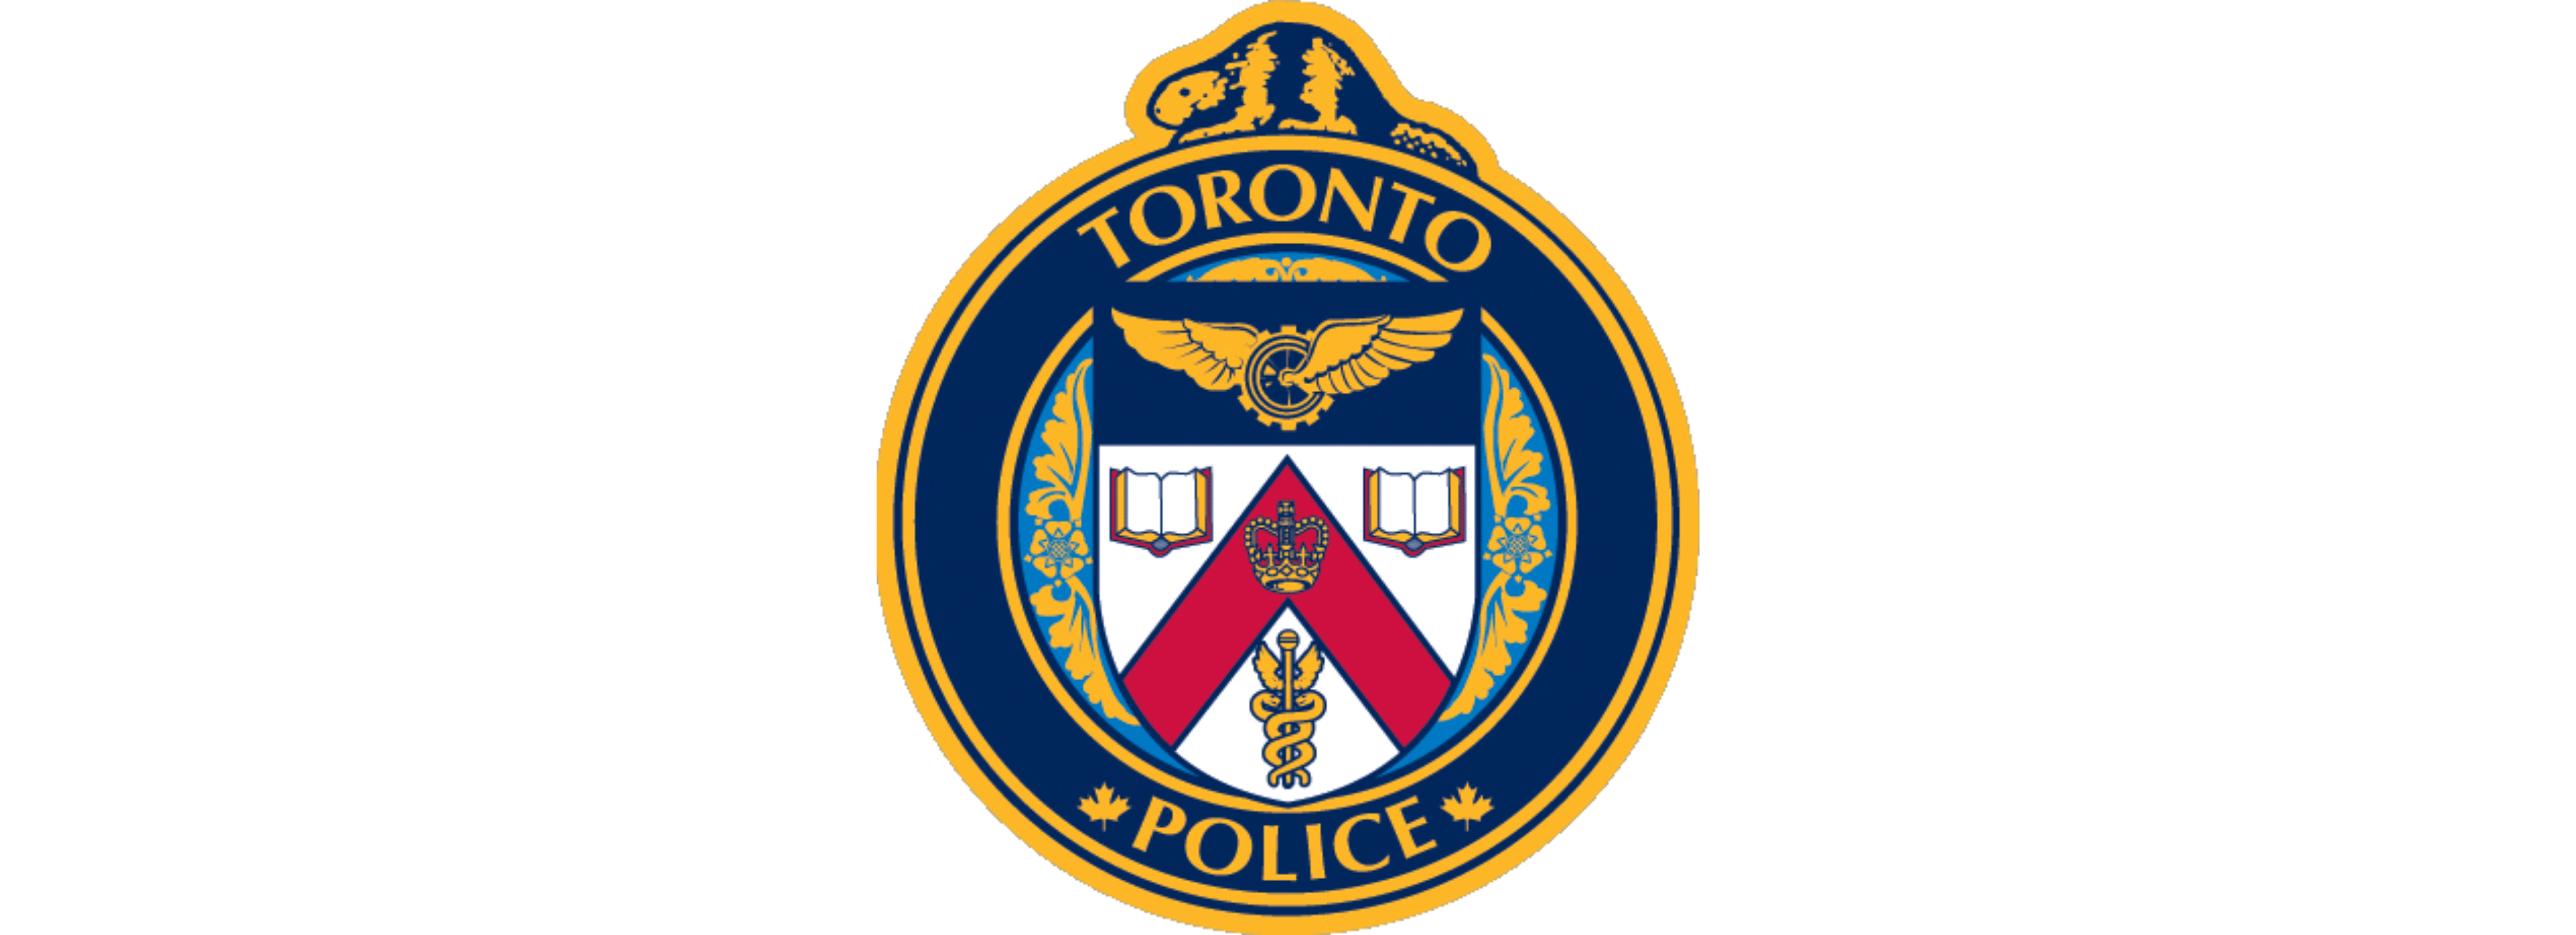 Emblem of the toronto police service on a green background. Toronto Caribana Carnival: Ultimate Guide to Caribana Festival Events